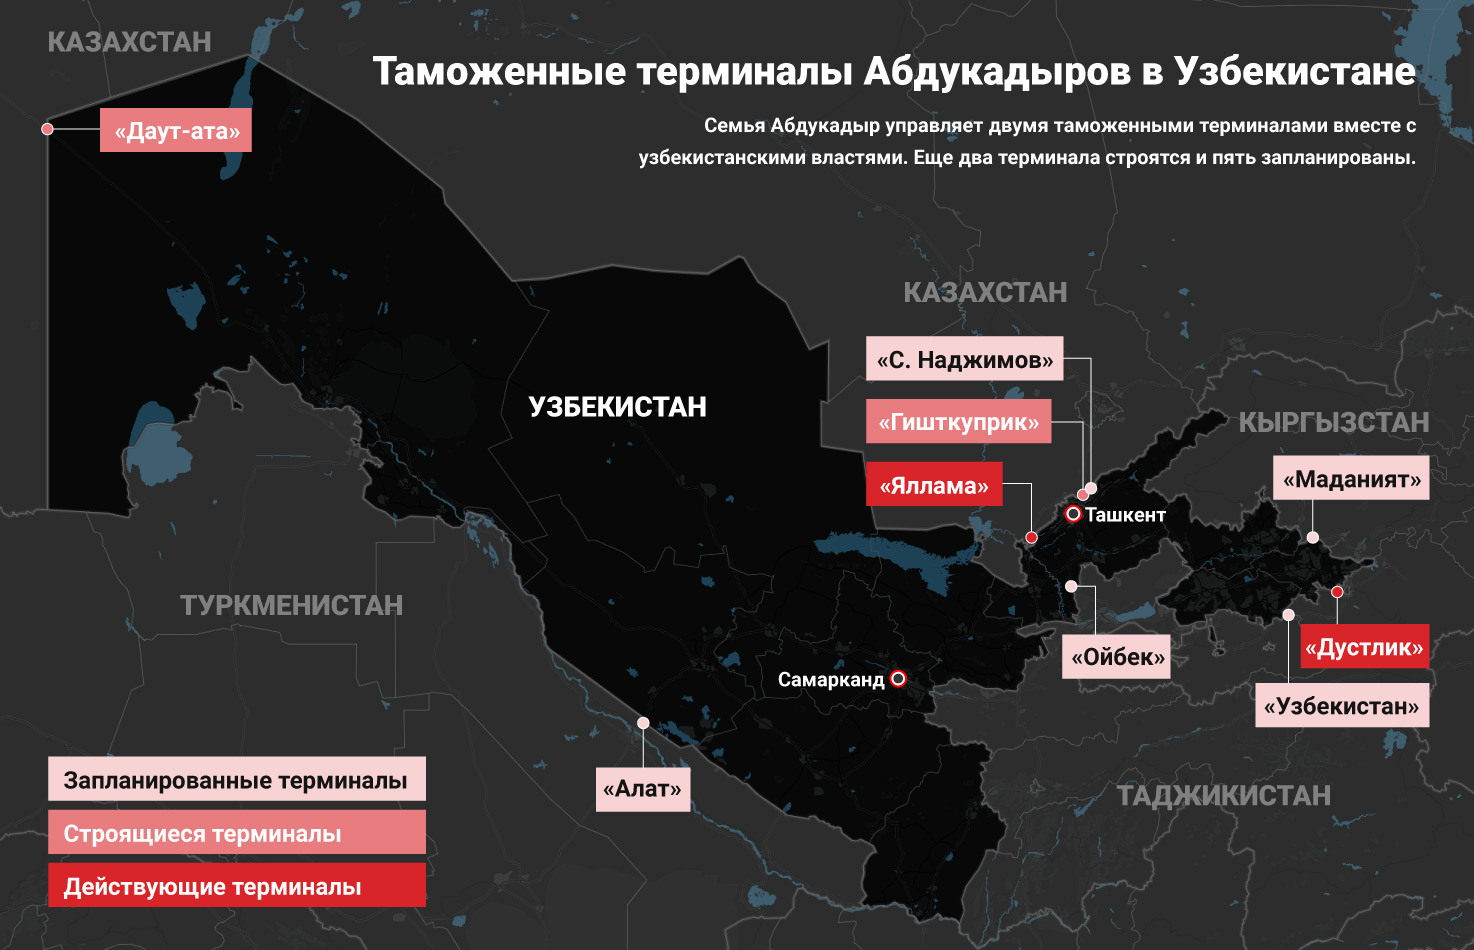 the-shadow-investor/Terminals-Map-rus.jpg